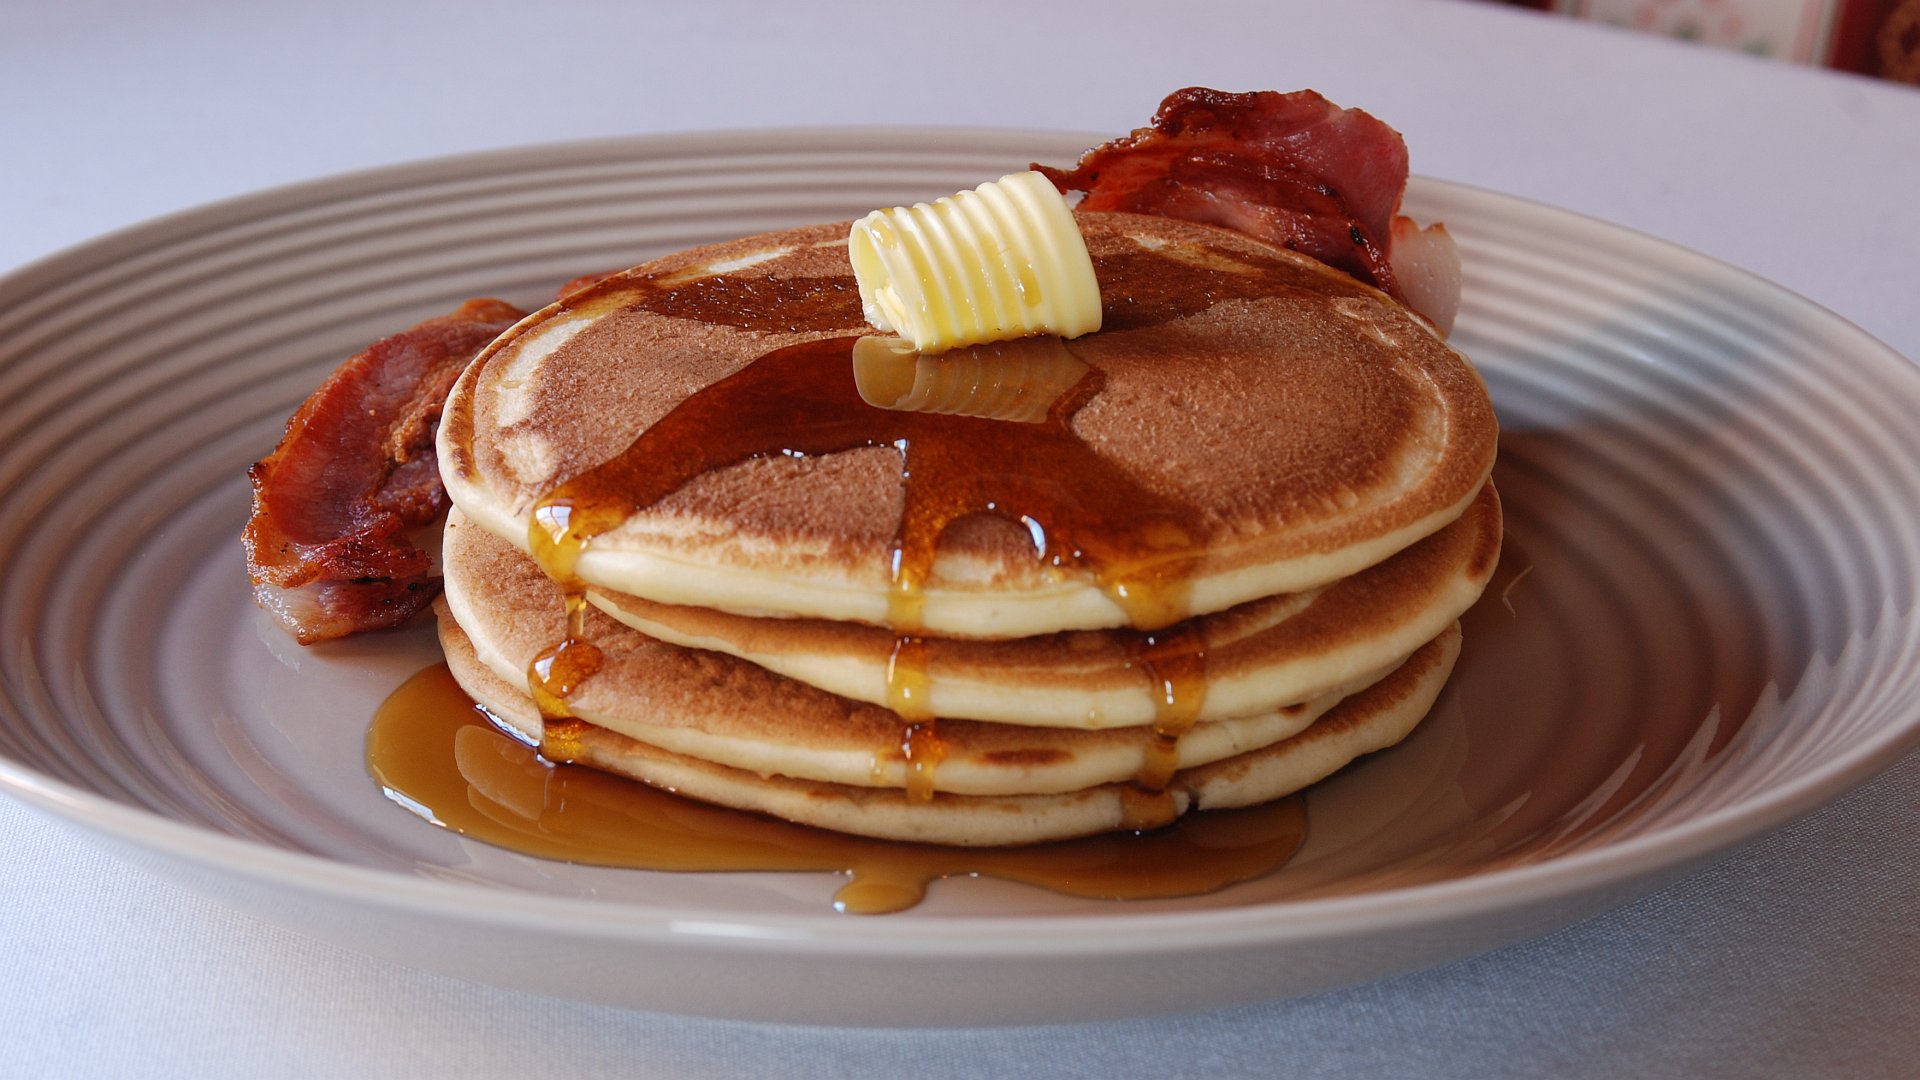 Eggs Bacon and Pancakes with Syrup